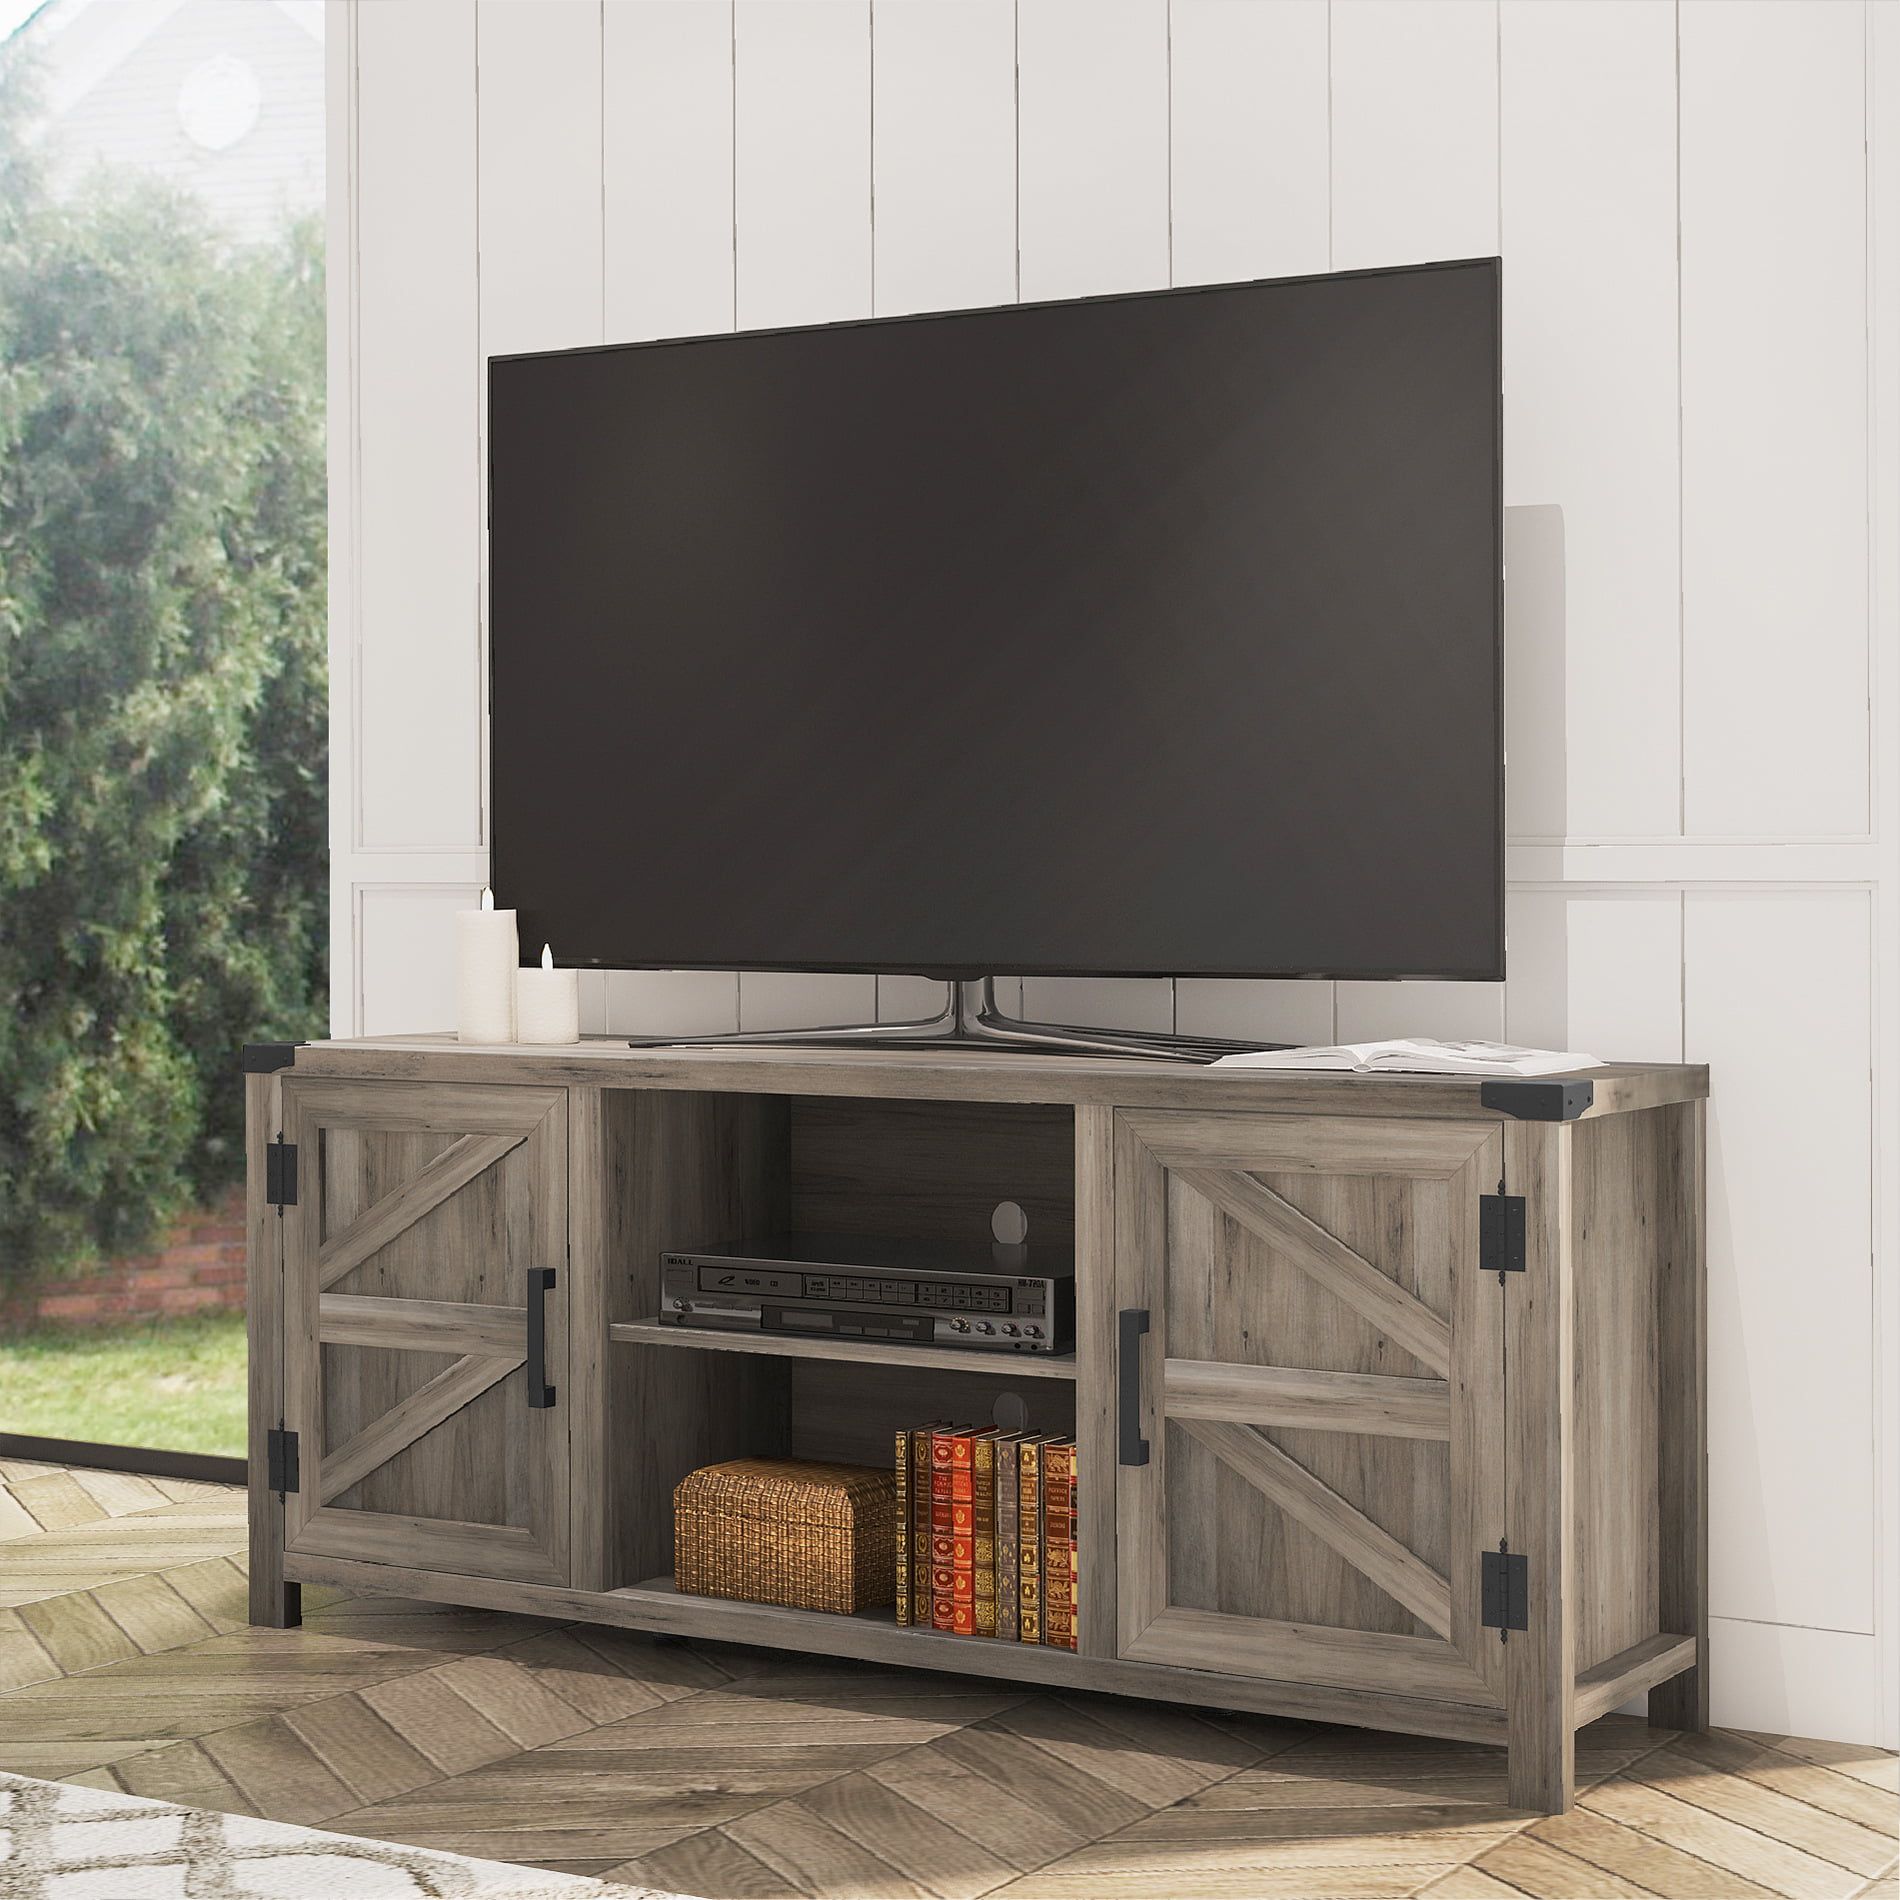 Fitueyes Farmhouse Barn Door Wood Tv Stands For 70'' Flat Screen, Media Regarding Farmhouse Tv Stands For 70 Inch Tv (View 17 of 20)